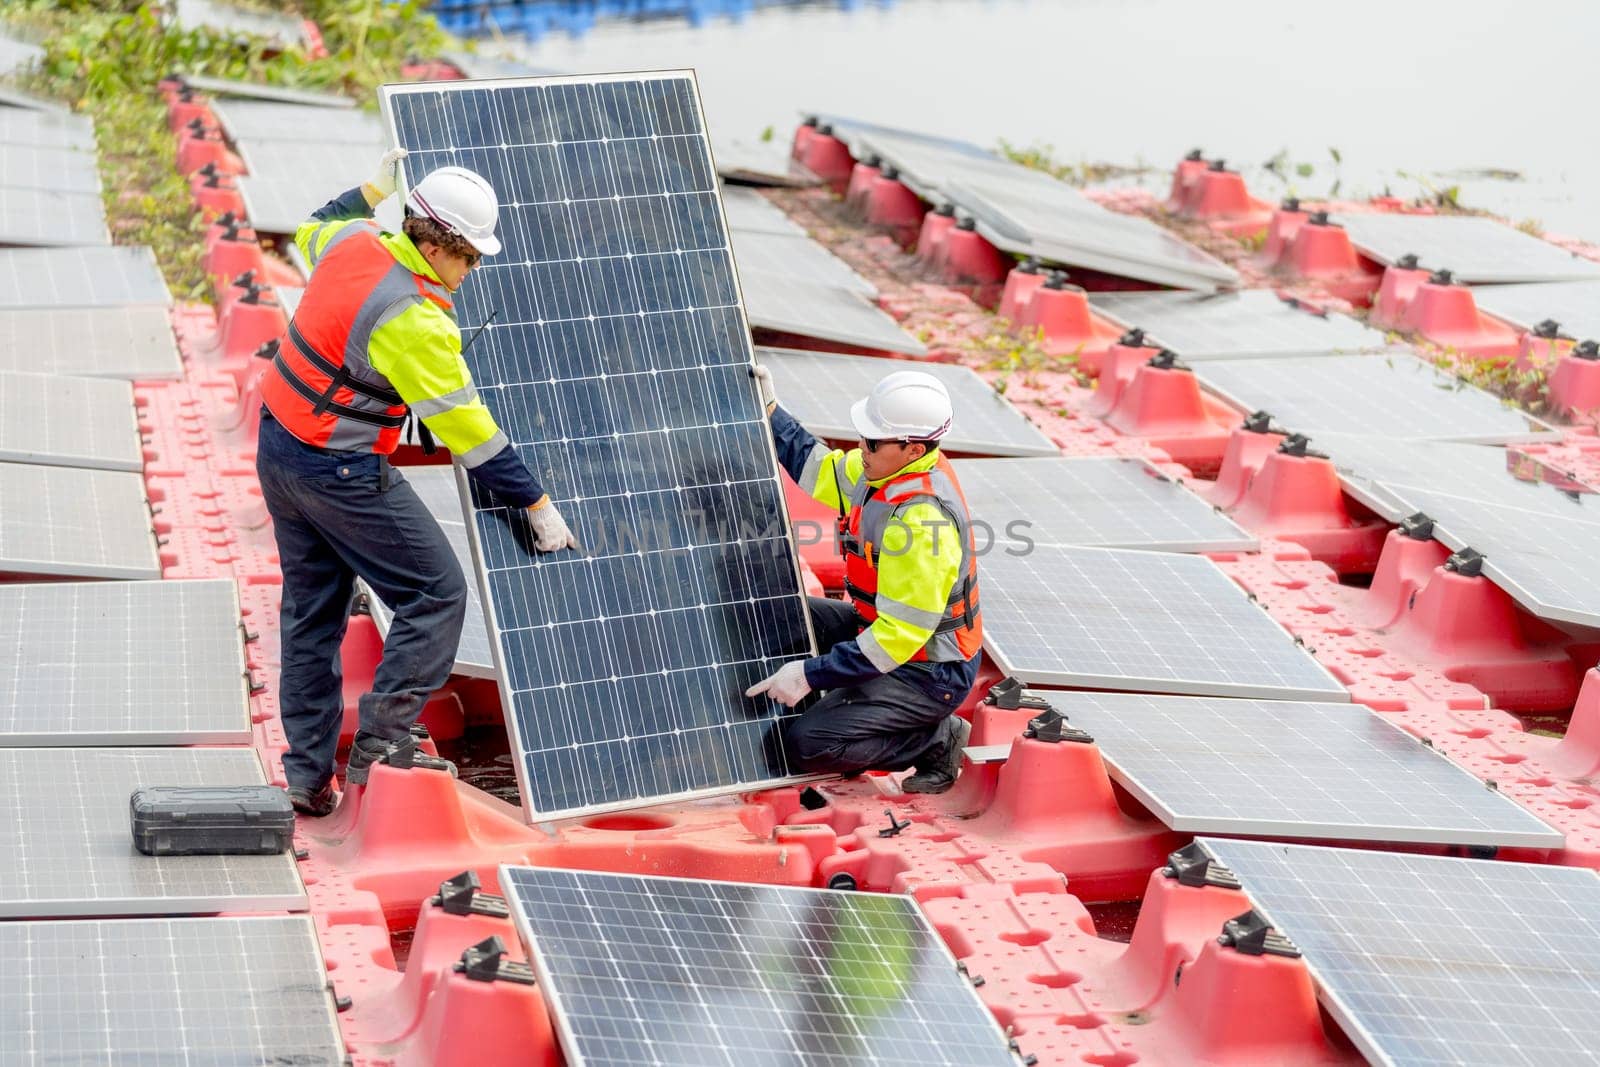 One of professional technician worker hold solar cell panel in vertical side also discuss with co-worker during work on base over water reservoir.